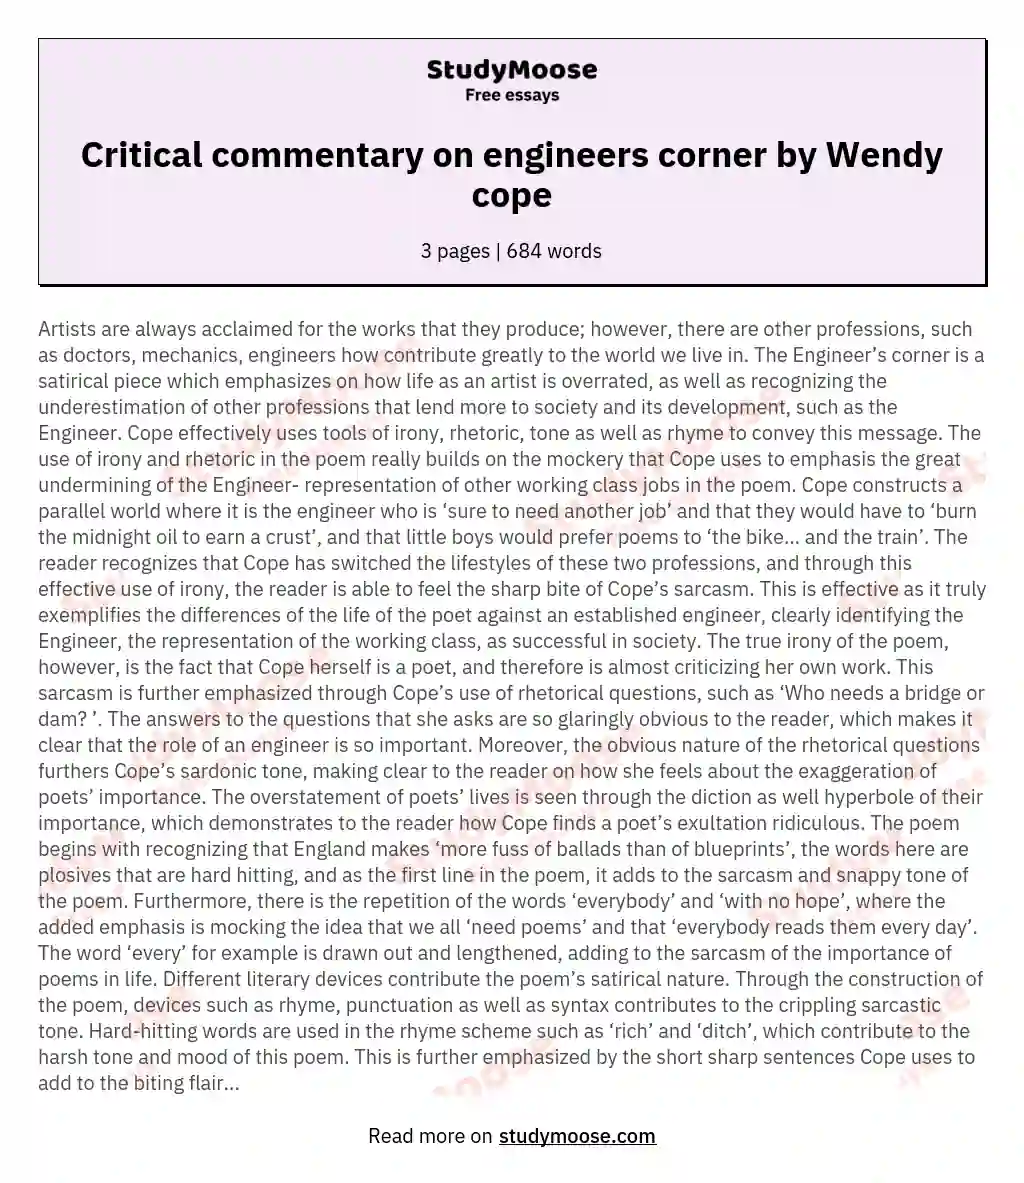 Critical commentary on engineers corner by Wendy cope essay